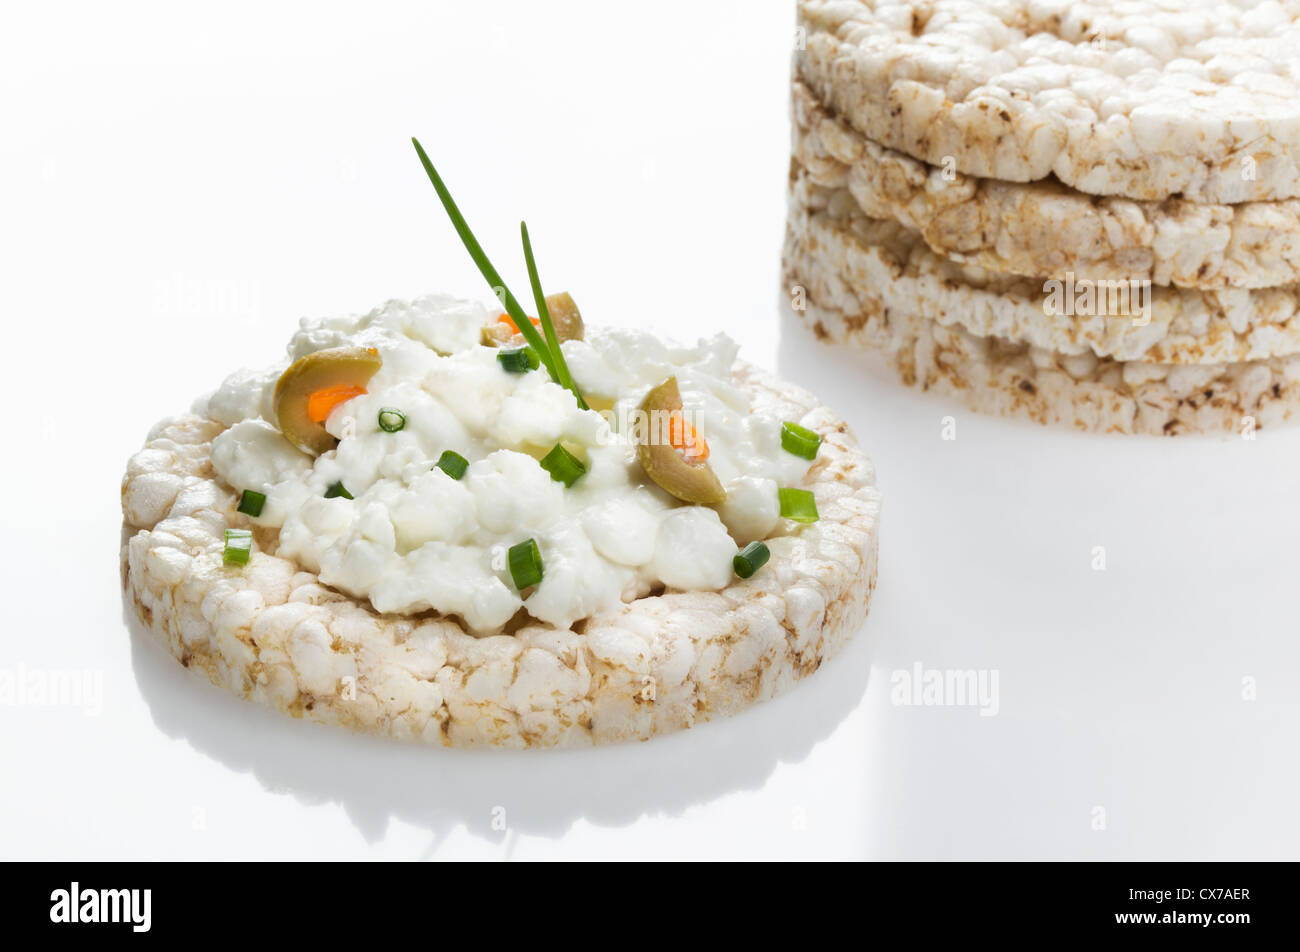 round Rice Cake topped with Cottage Cheese Stock Photo